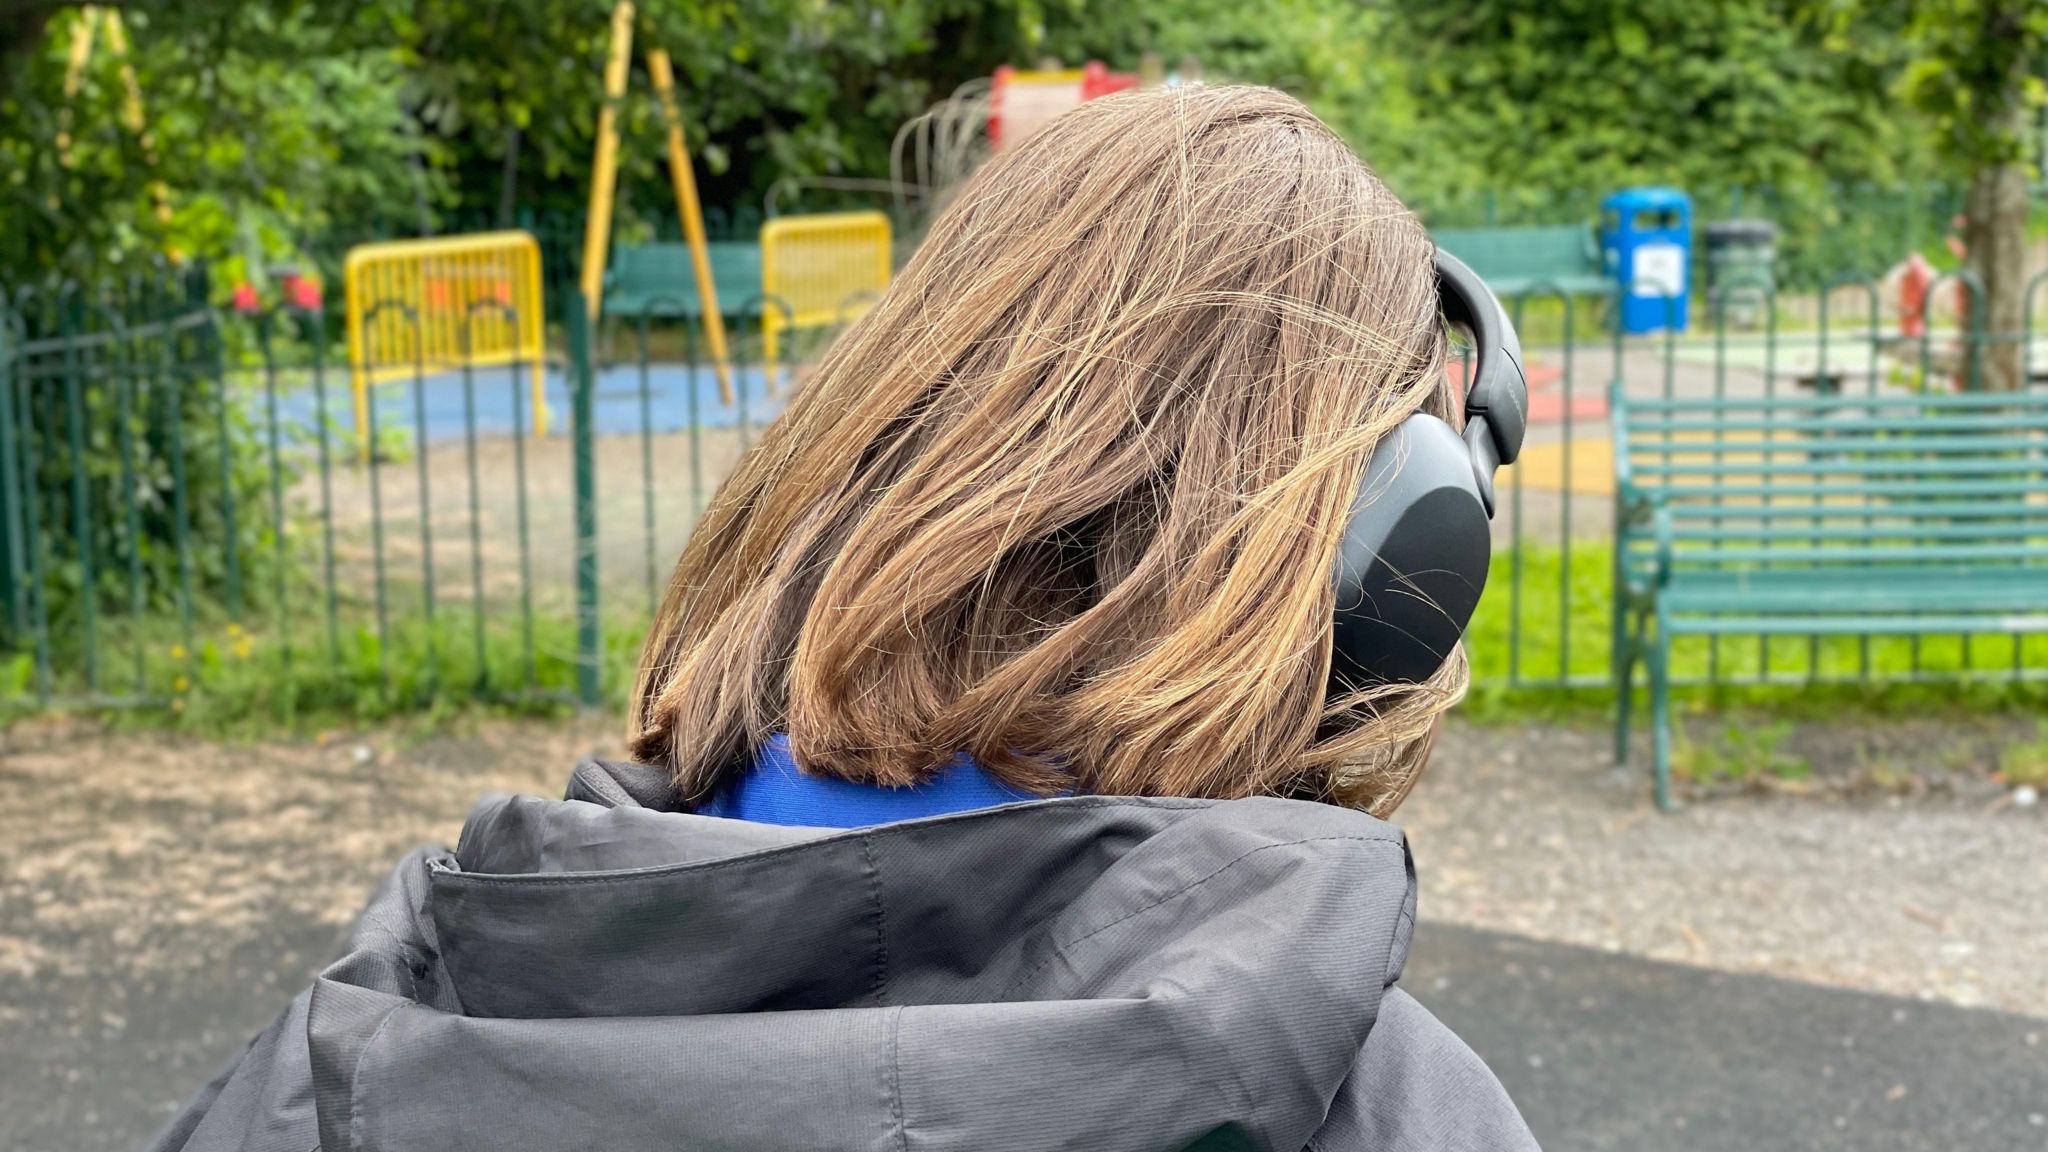 Child from the back weating headphones